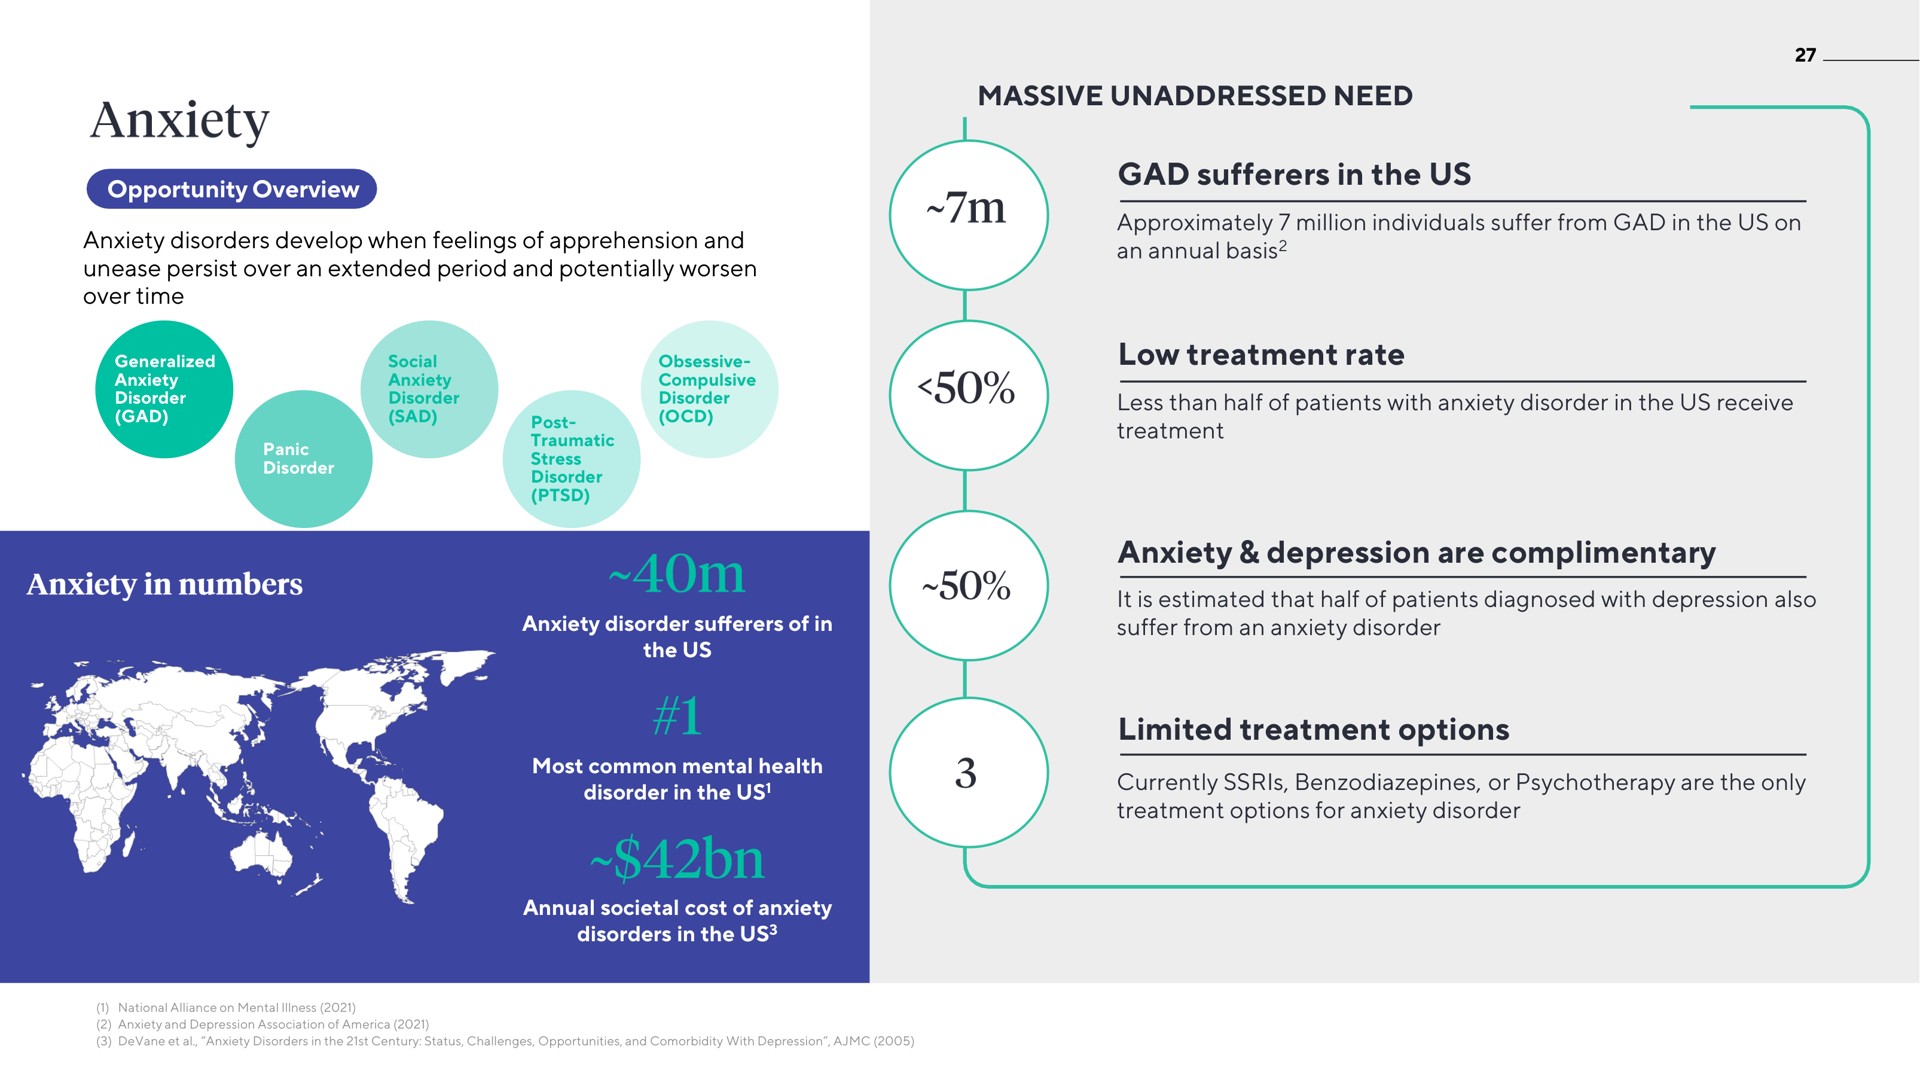 massive unaddressed need gad sufferers in the us low treatment rate anxiety depression are complimentary limited treatment options | ATAI